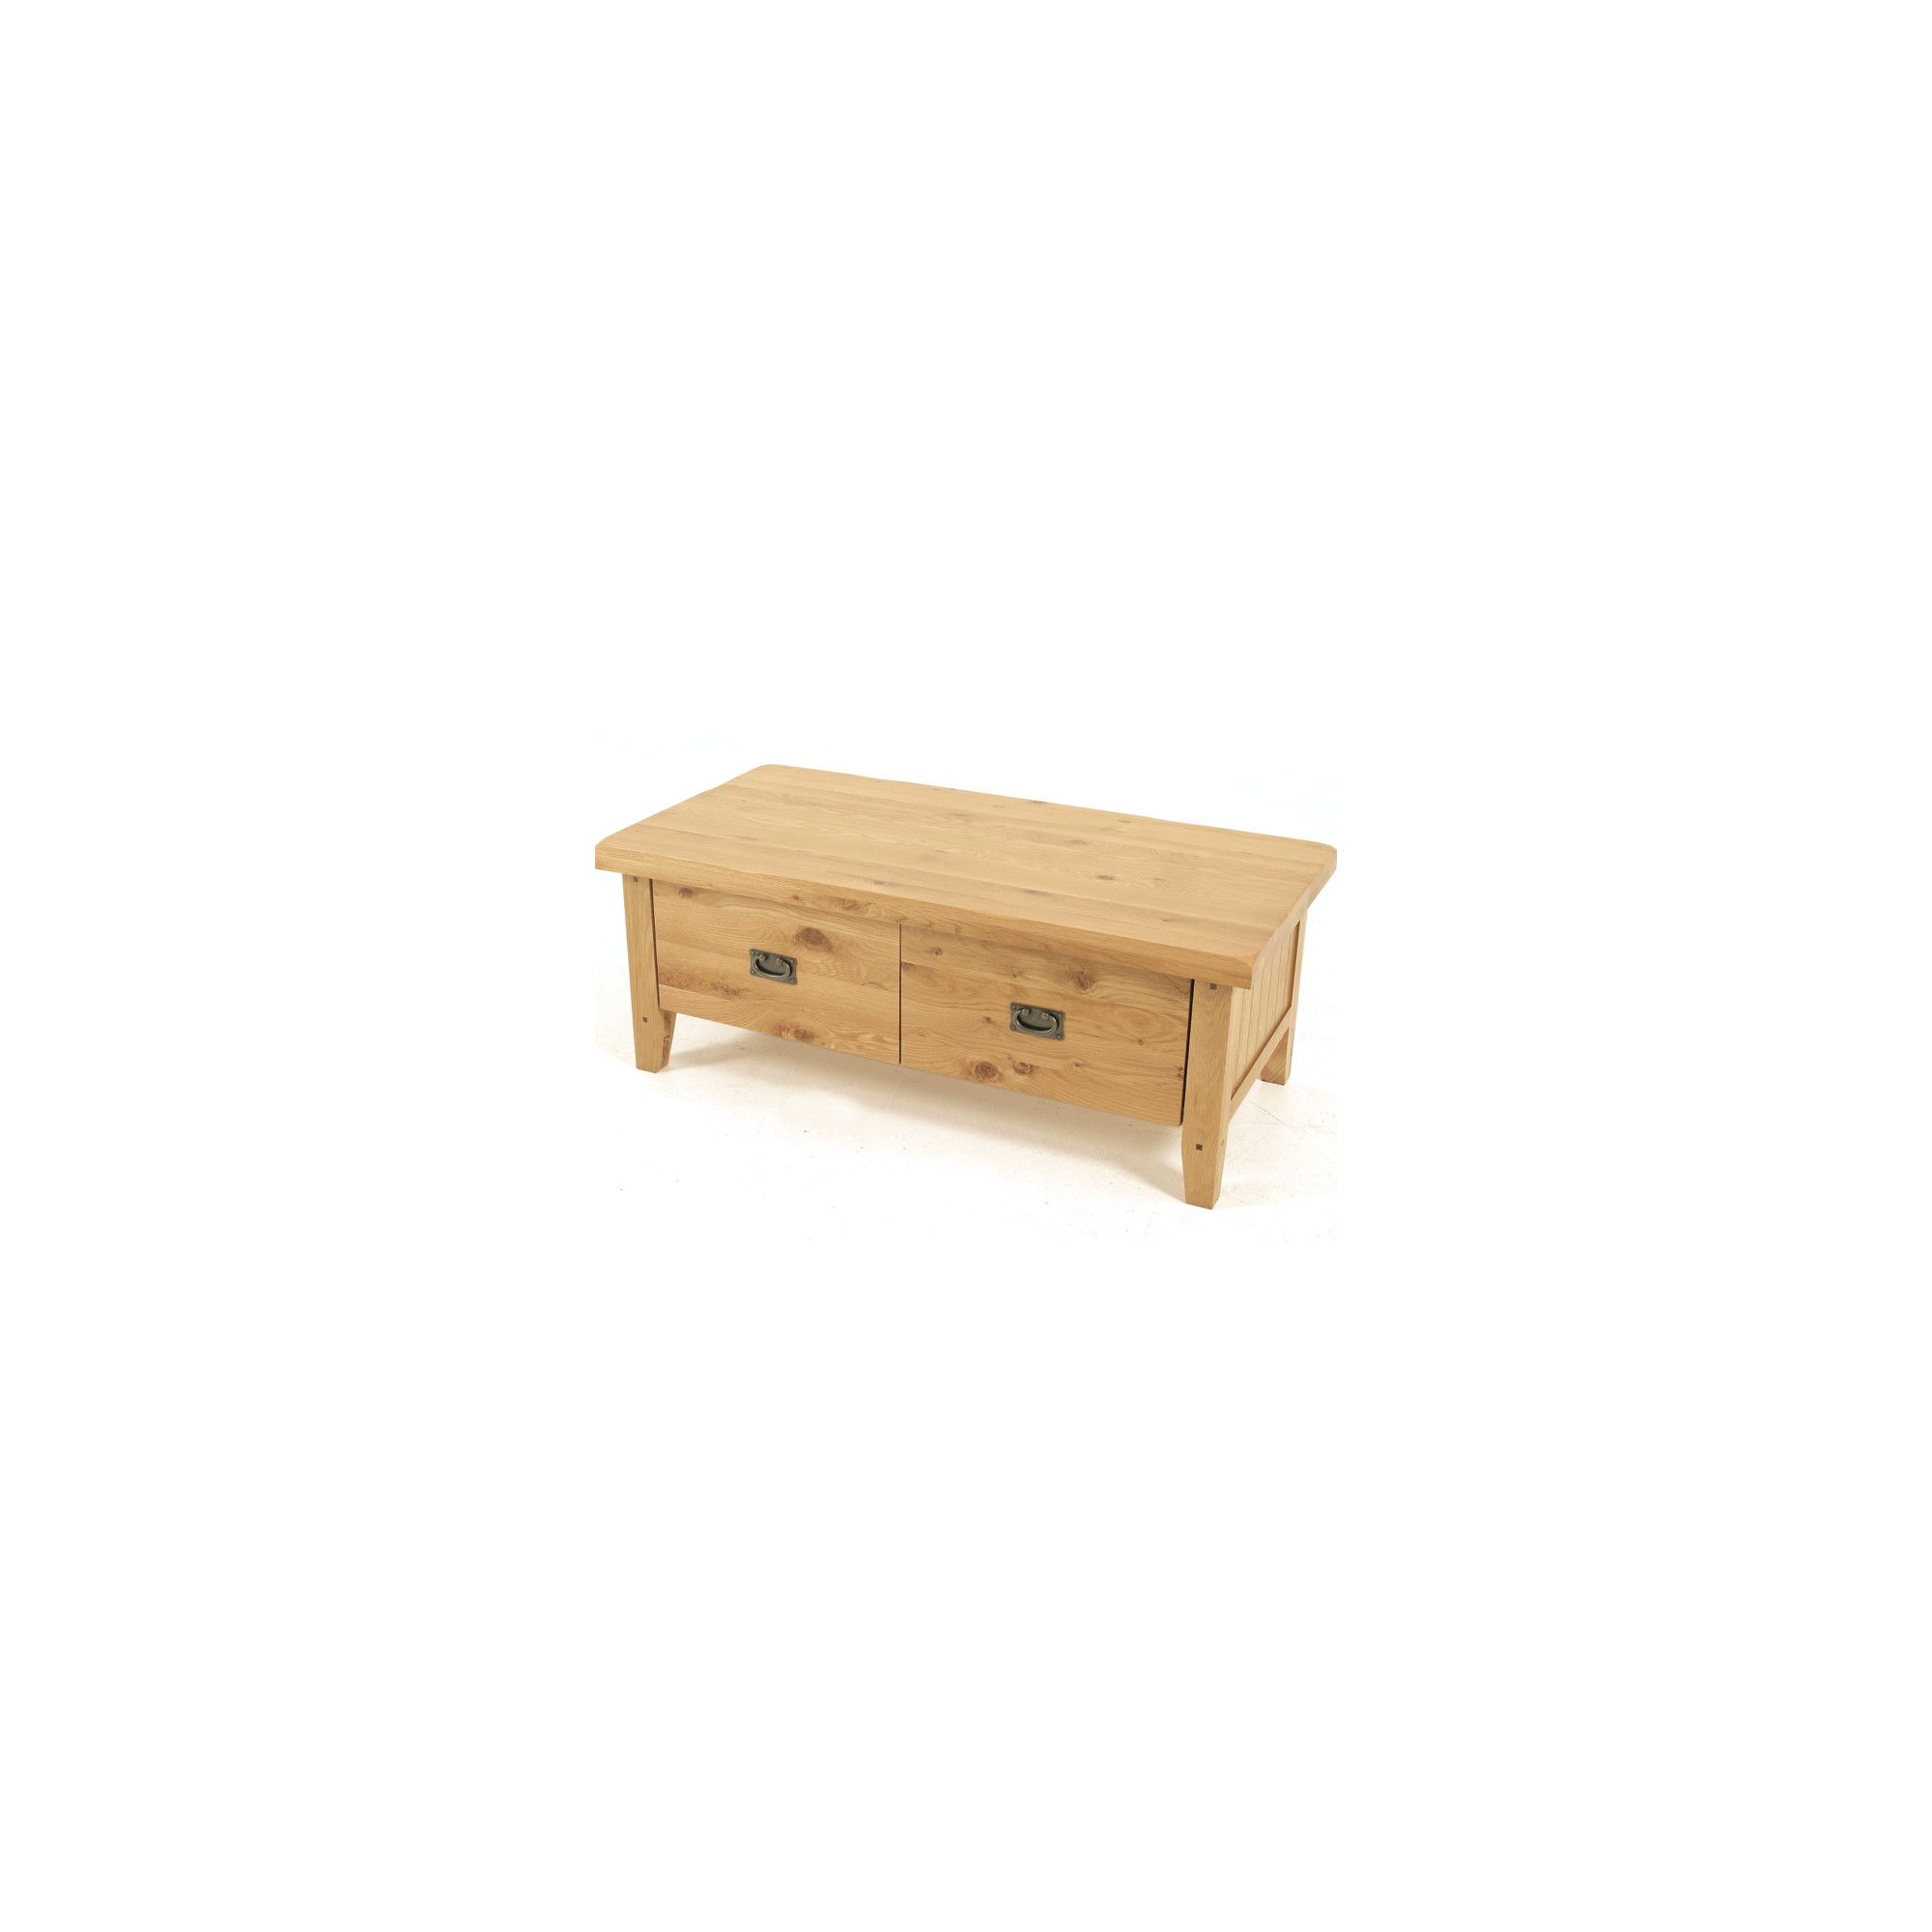 Elements Newport Coffee Table at Tesco Direct